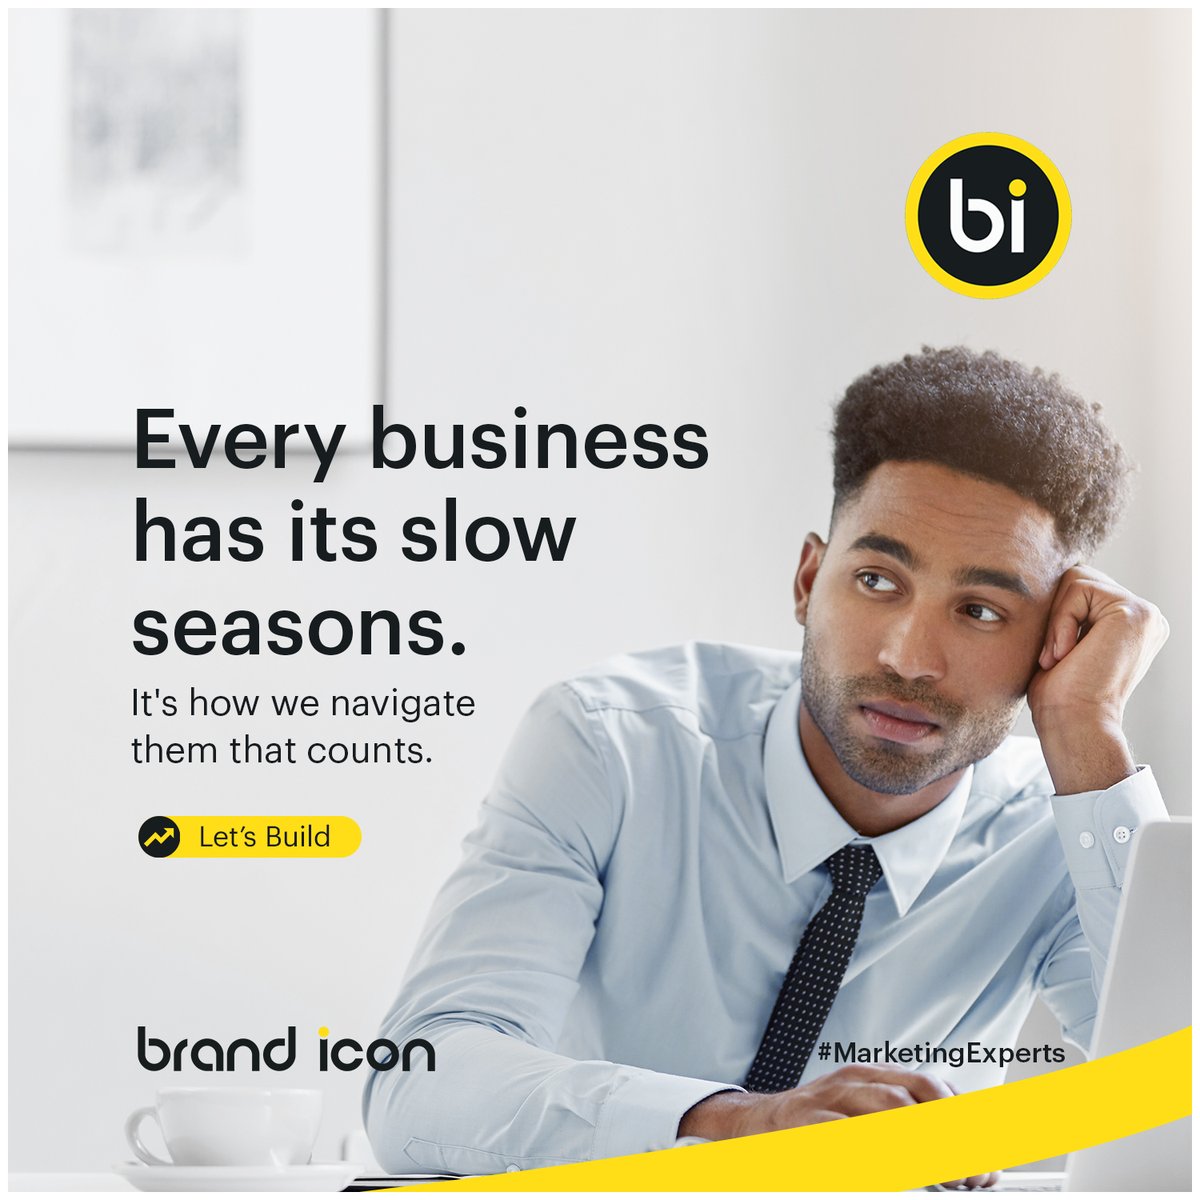 In the rhythm of every business, there are moments that test our patience and resilience. But remember, it's not about the slowdown itself, but how we navigate through it that truly matters. 
:
#BusinessResilience #ThriveTogether #BrandIcon #LetsBuild